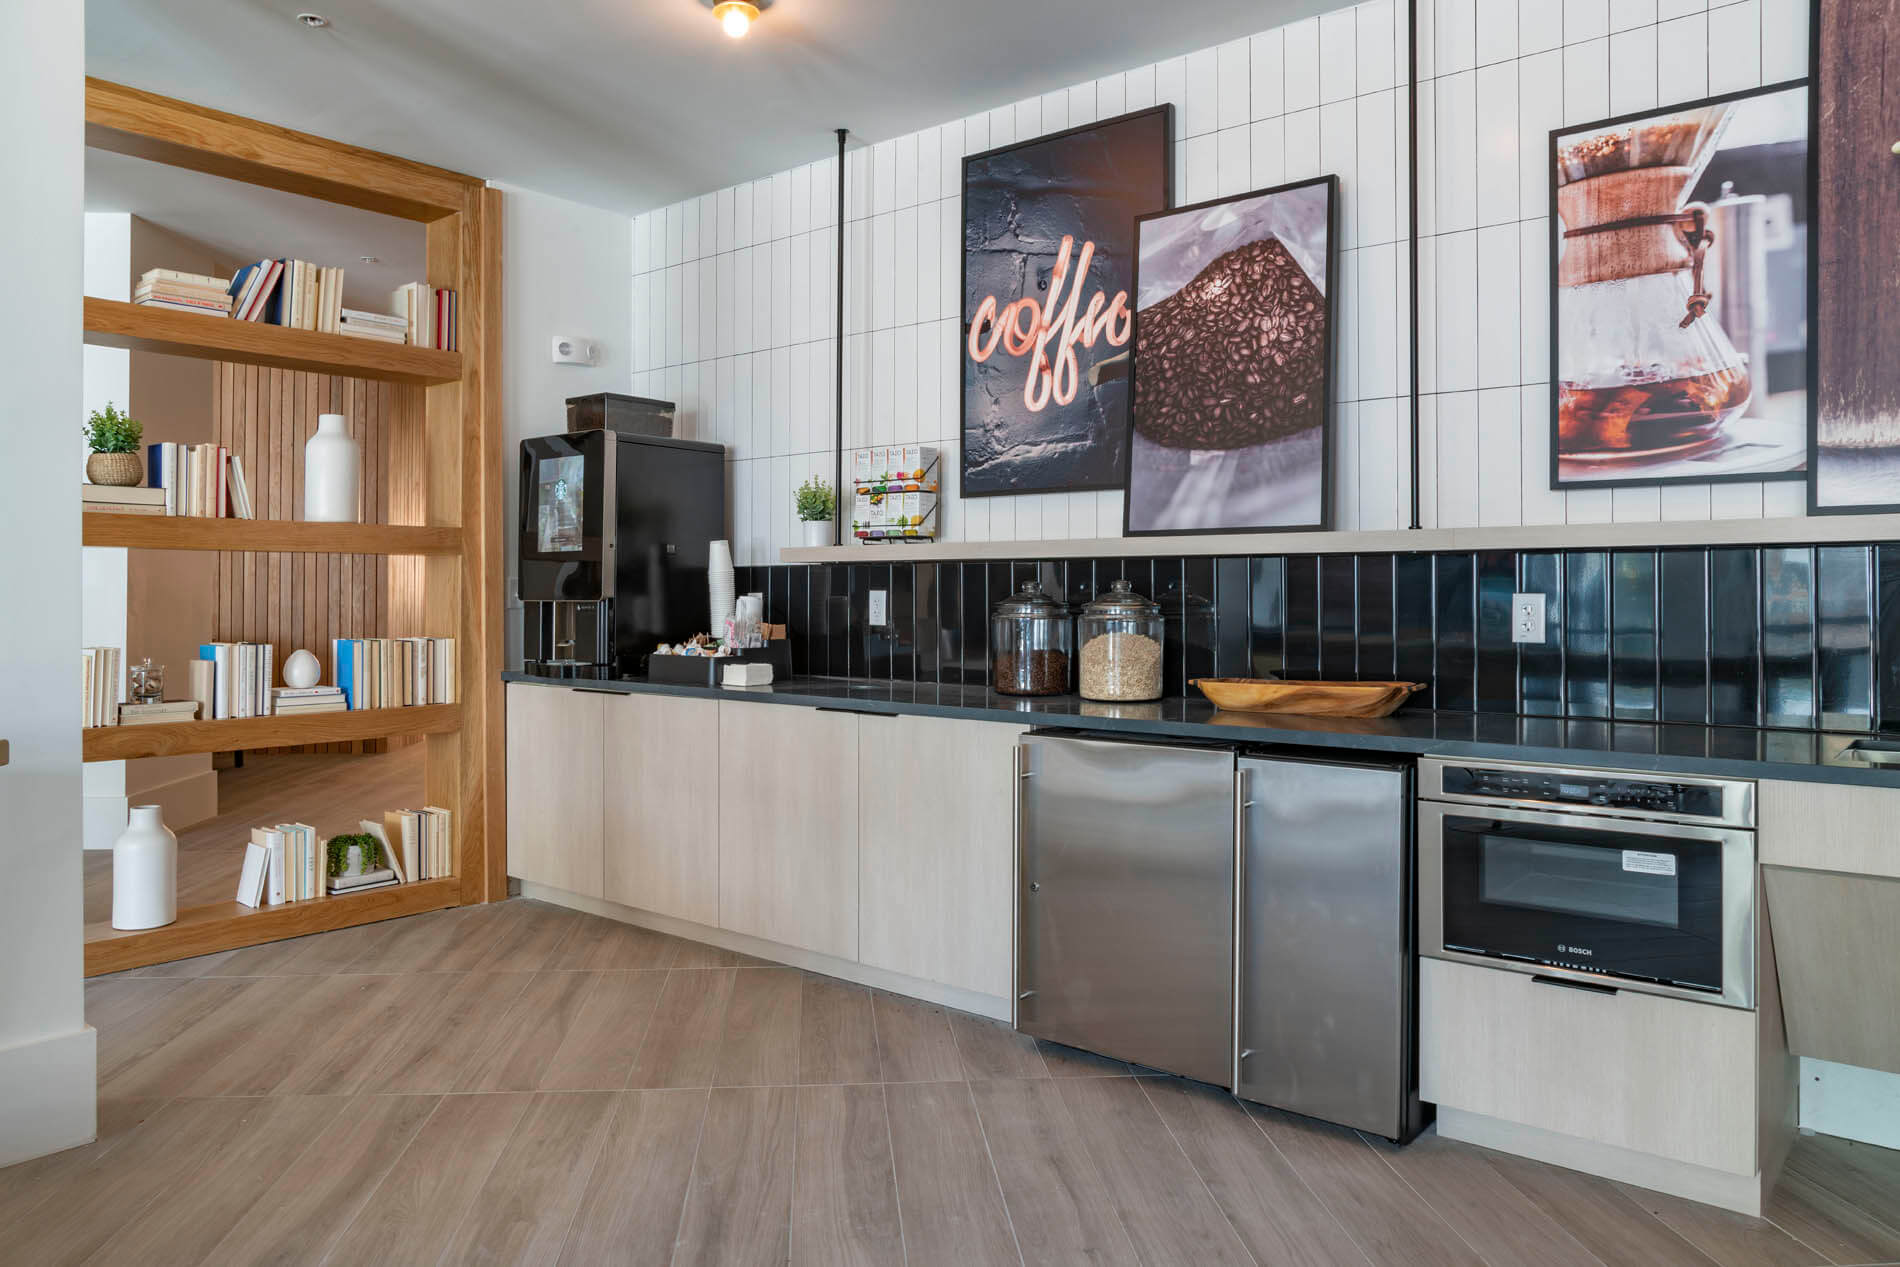 Essex Luxe Apartments coffee bar